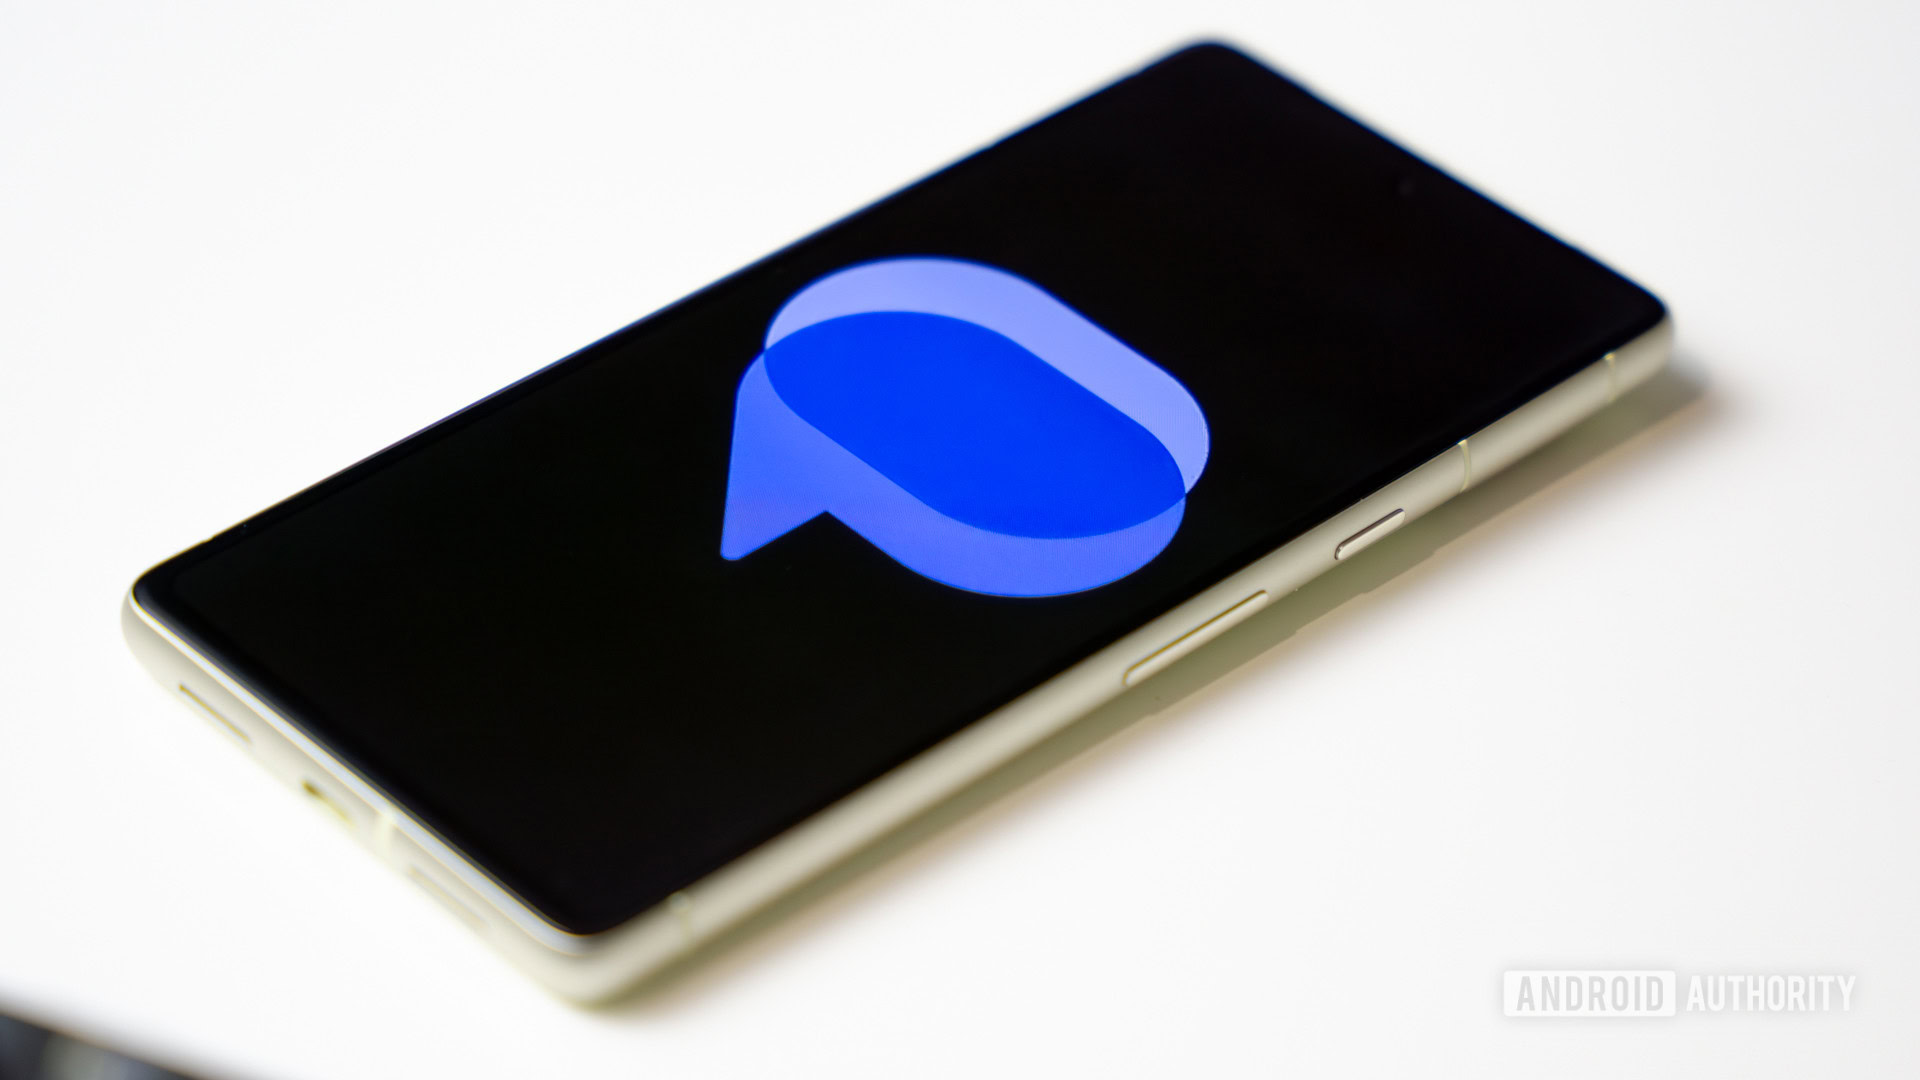 Google Messages notifications will show names of unknown people who contact you